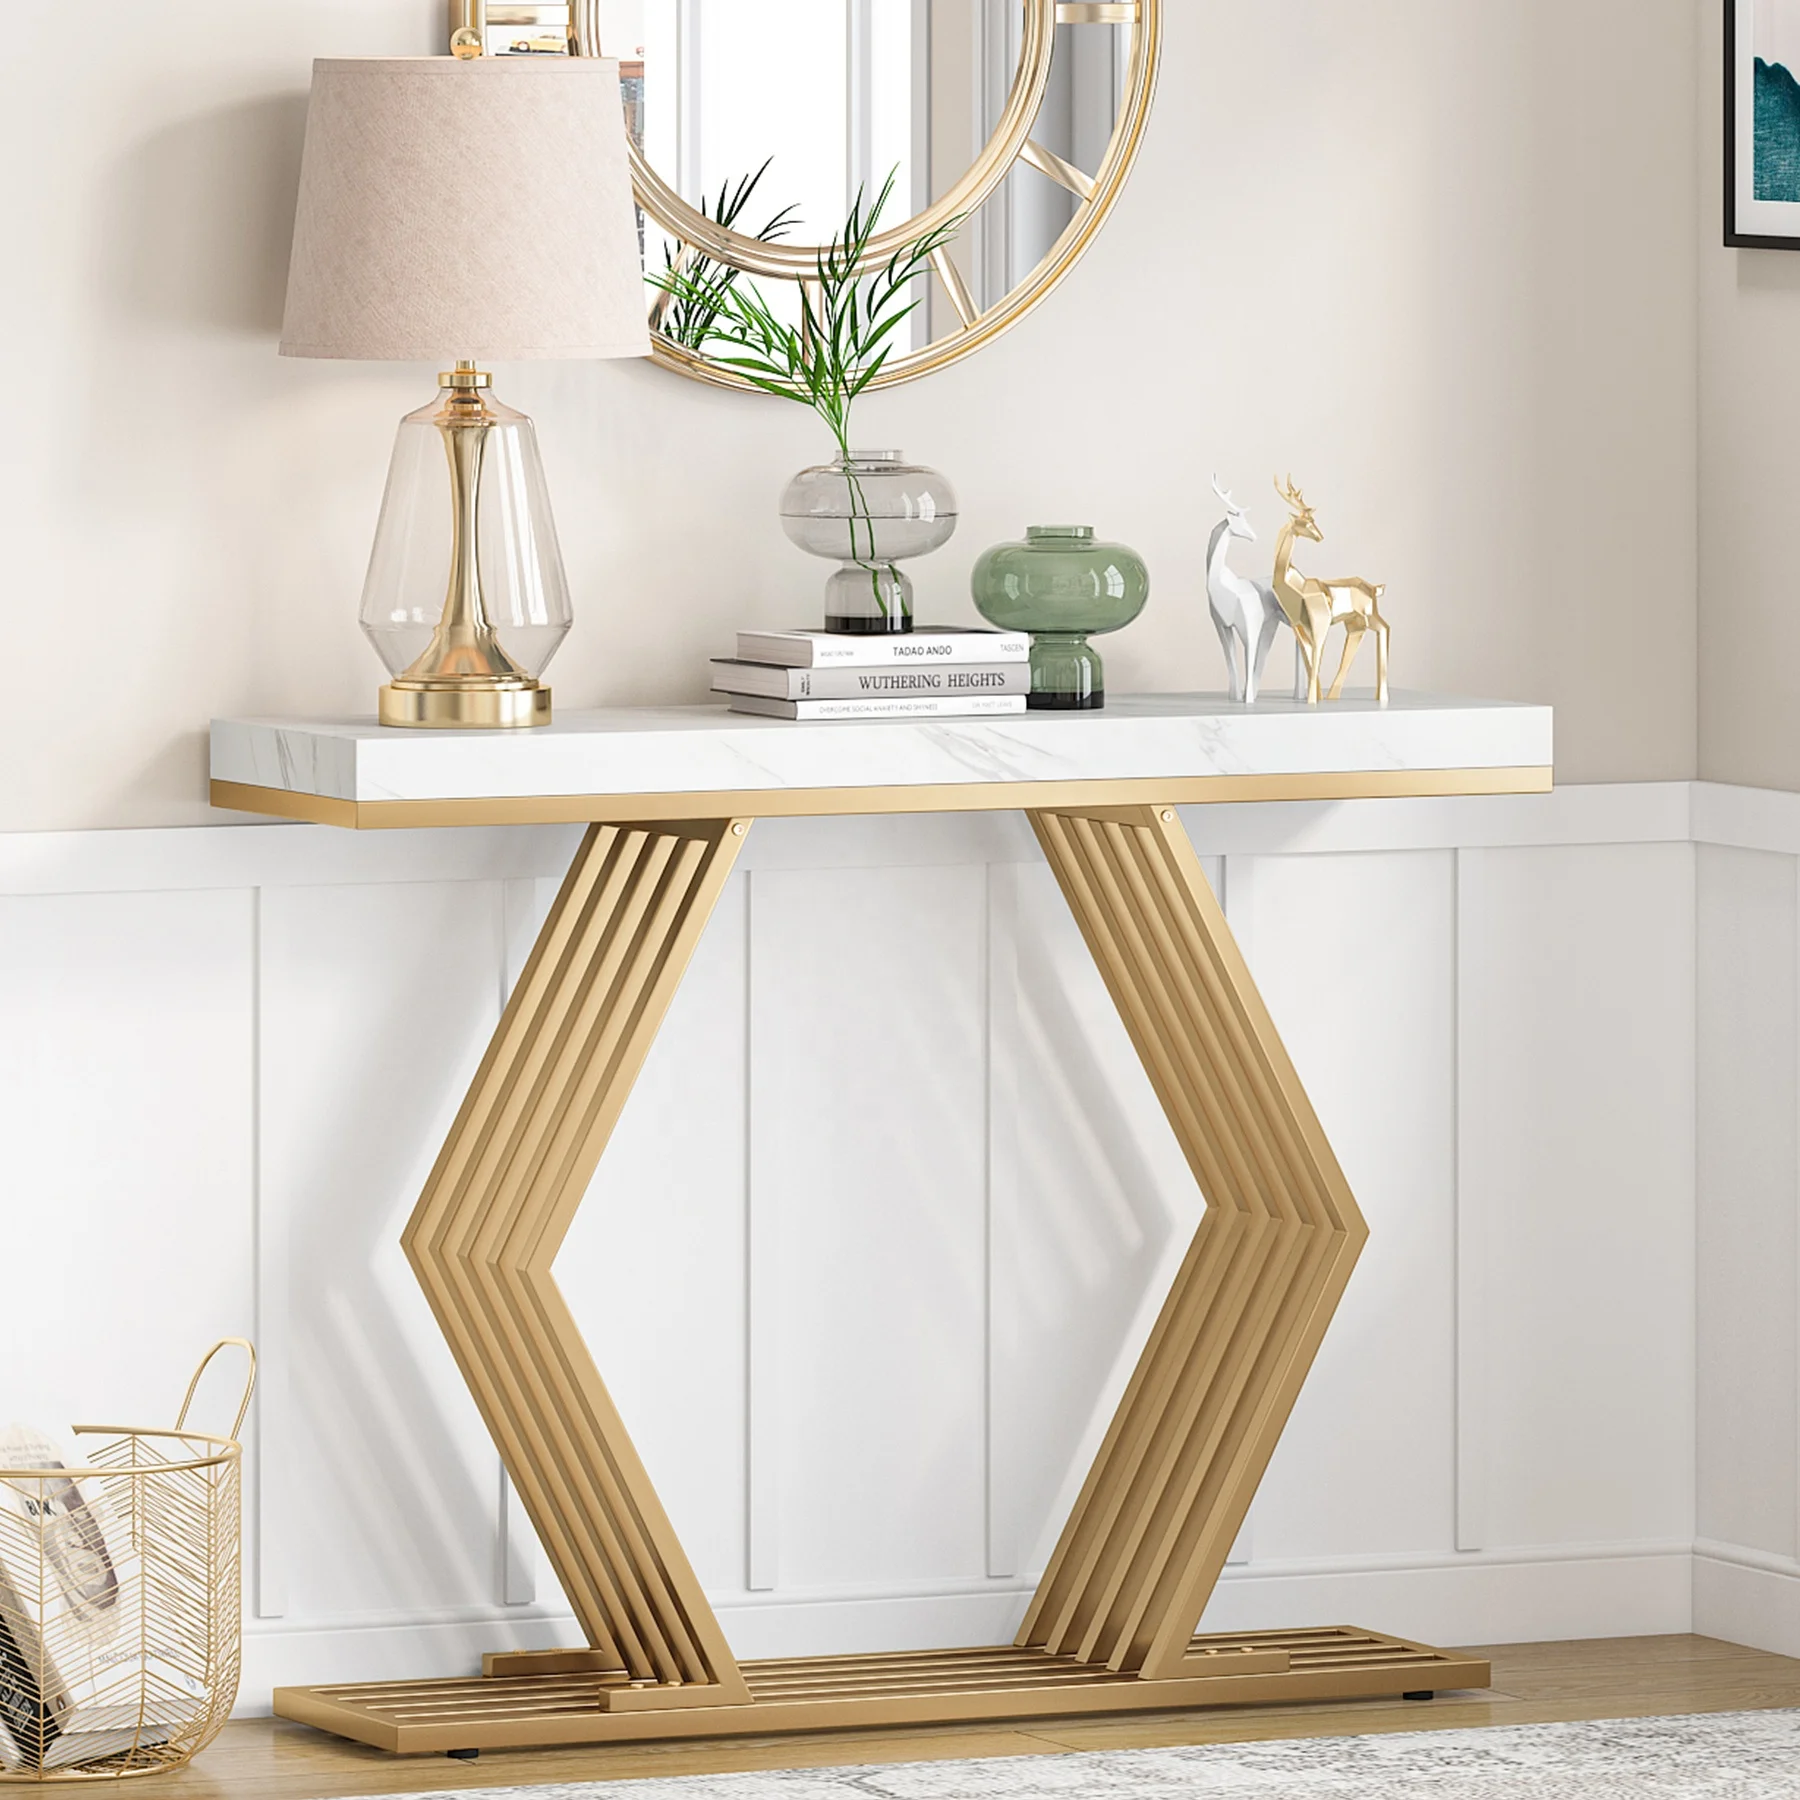 Tribesigns 42 inches Modern Geometric Metal Base White Faux Marble Top Entryway Foyer Table Gold Console Table Home Decor